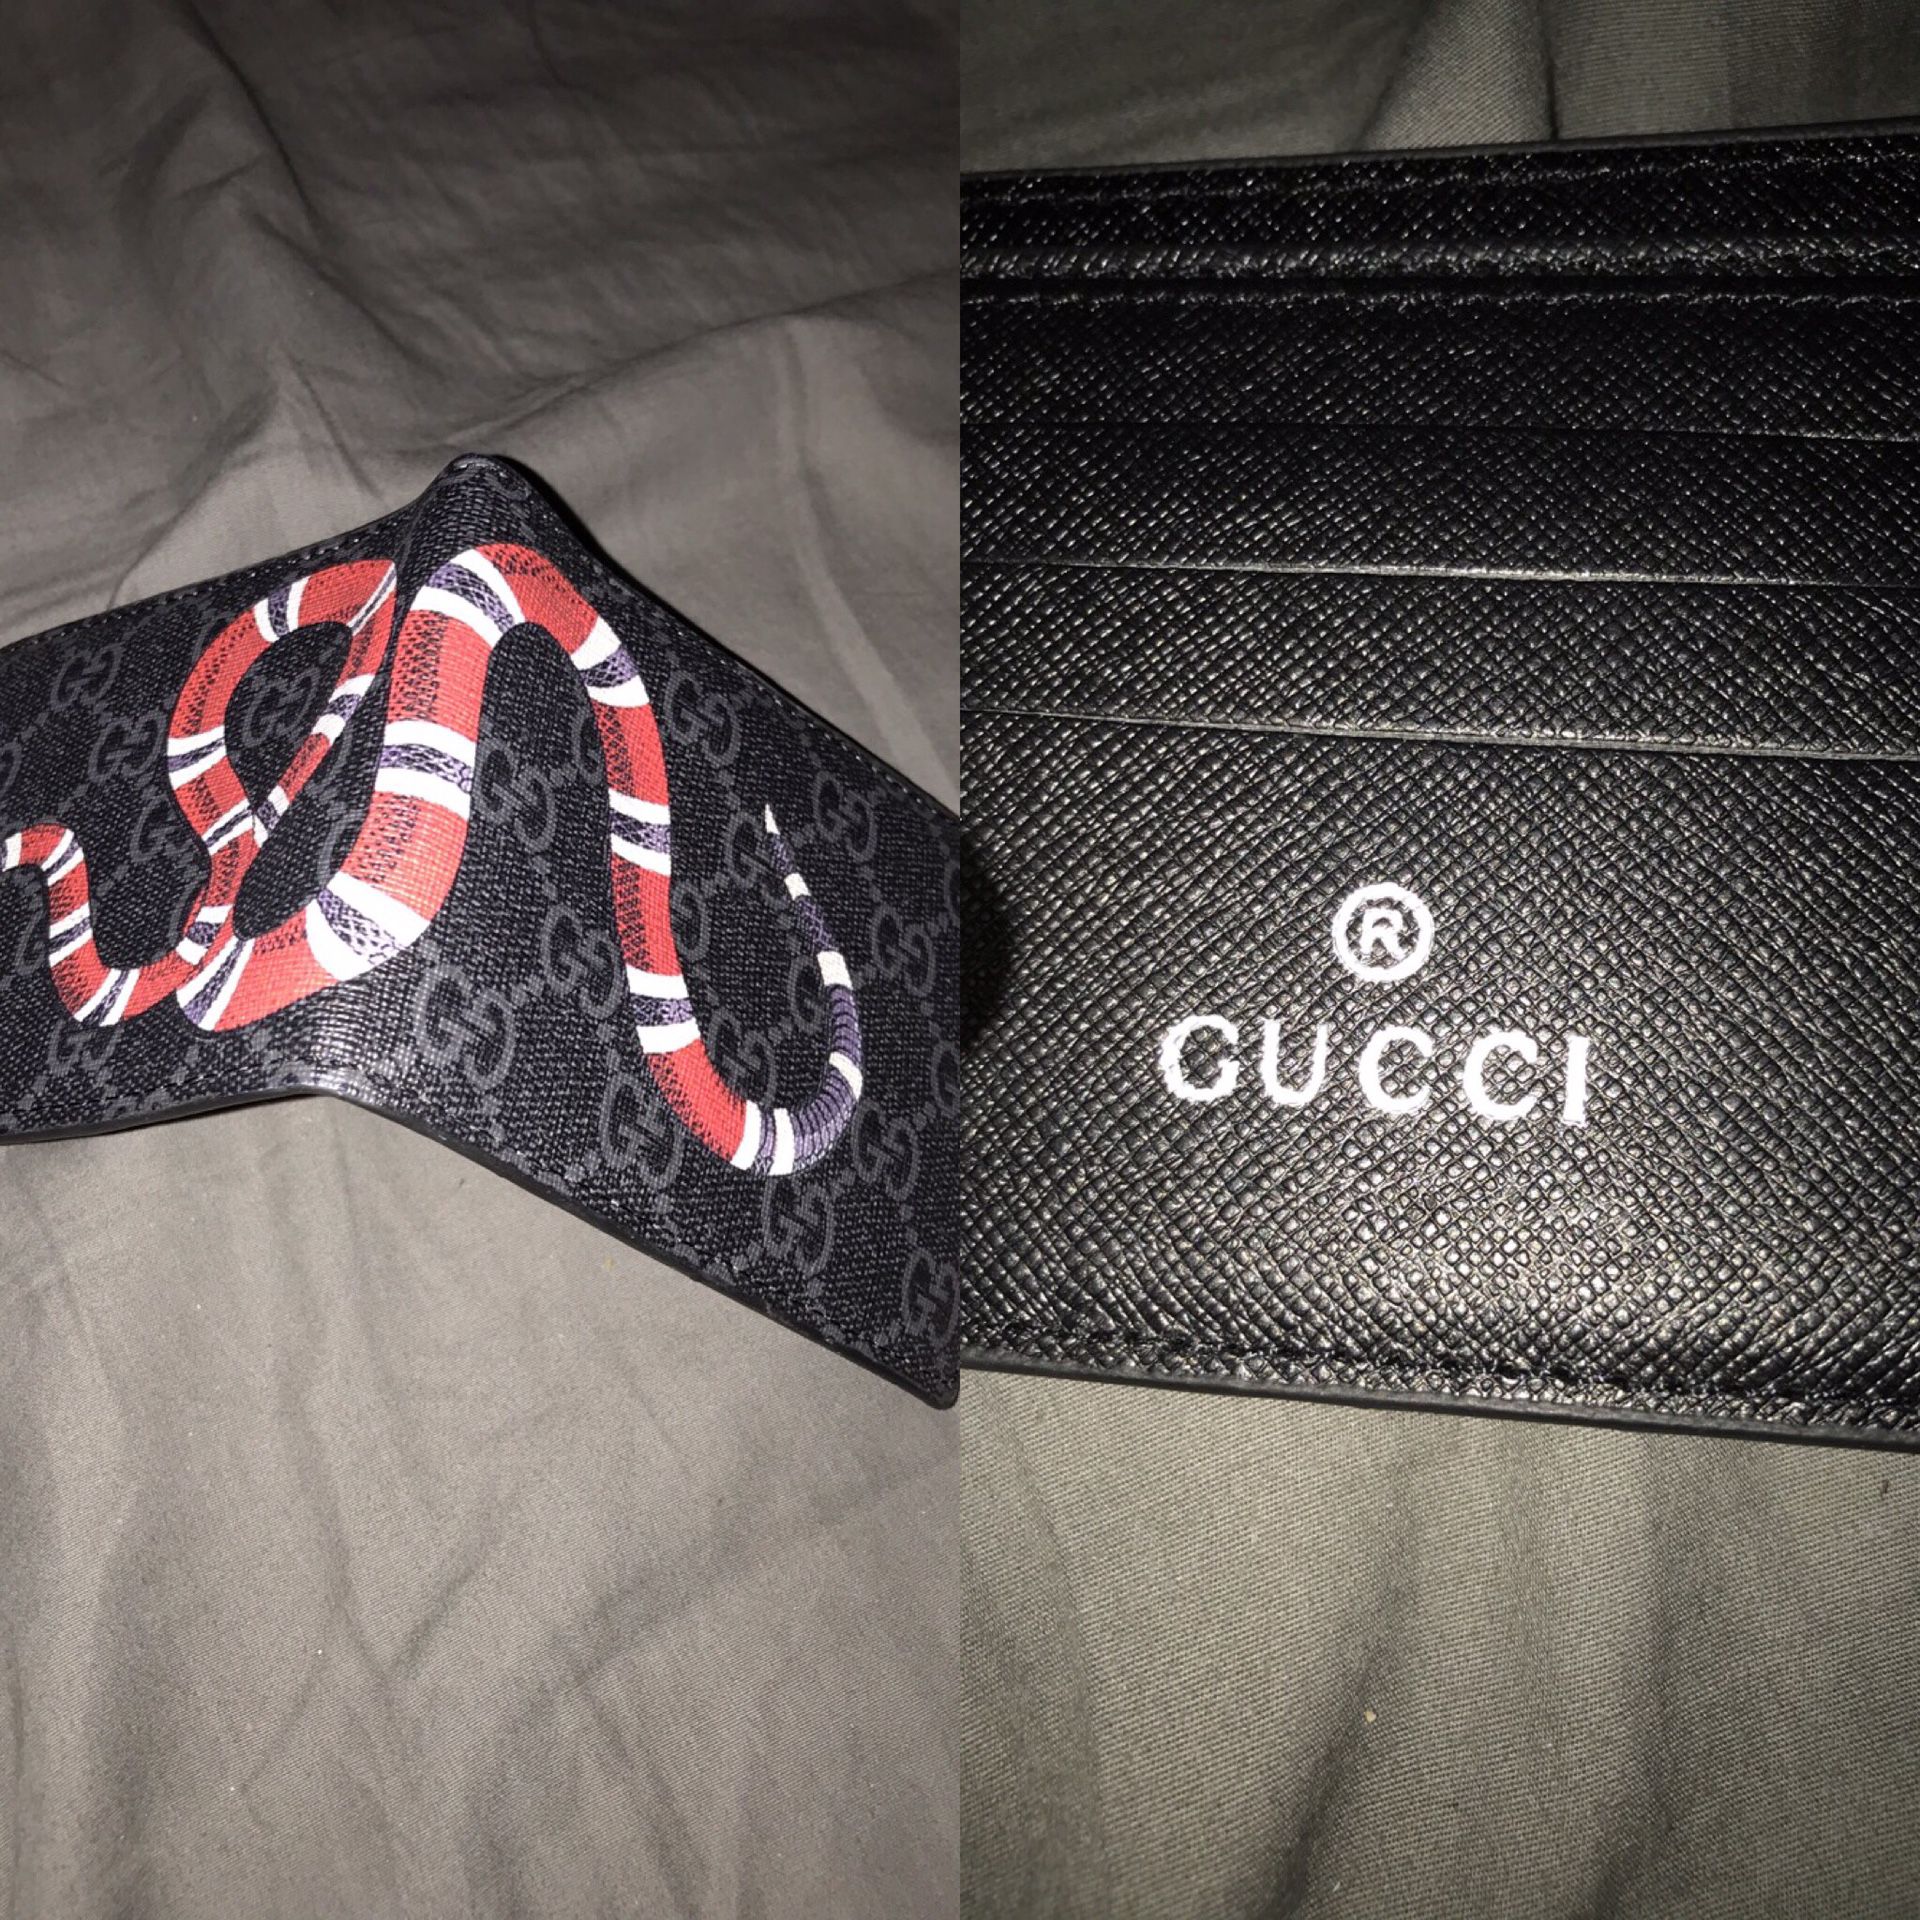 Gucci wallet. Never used